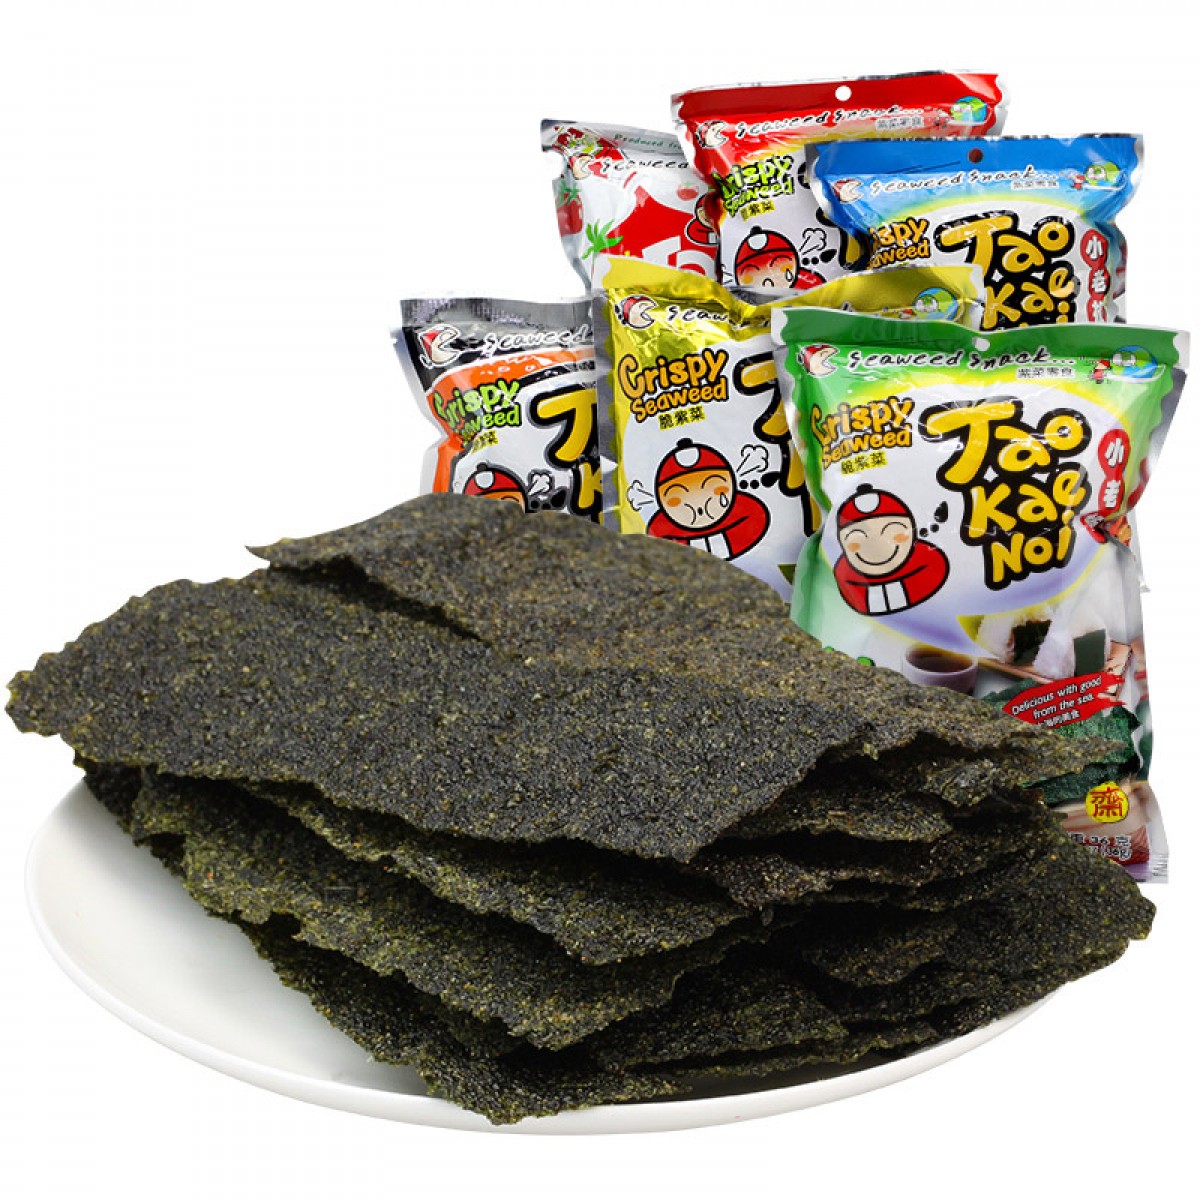 Thailand's imported small boss seaweed slices 32g * 6 packets of instant seaweed, seaweed slices, snacks, fried seaweed 